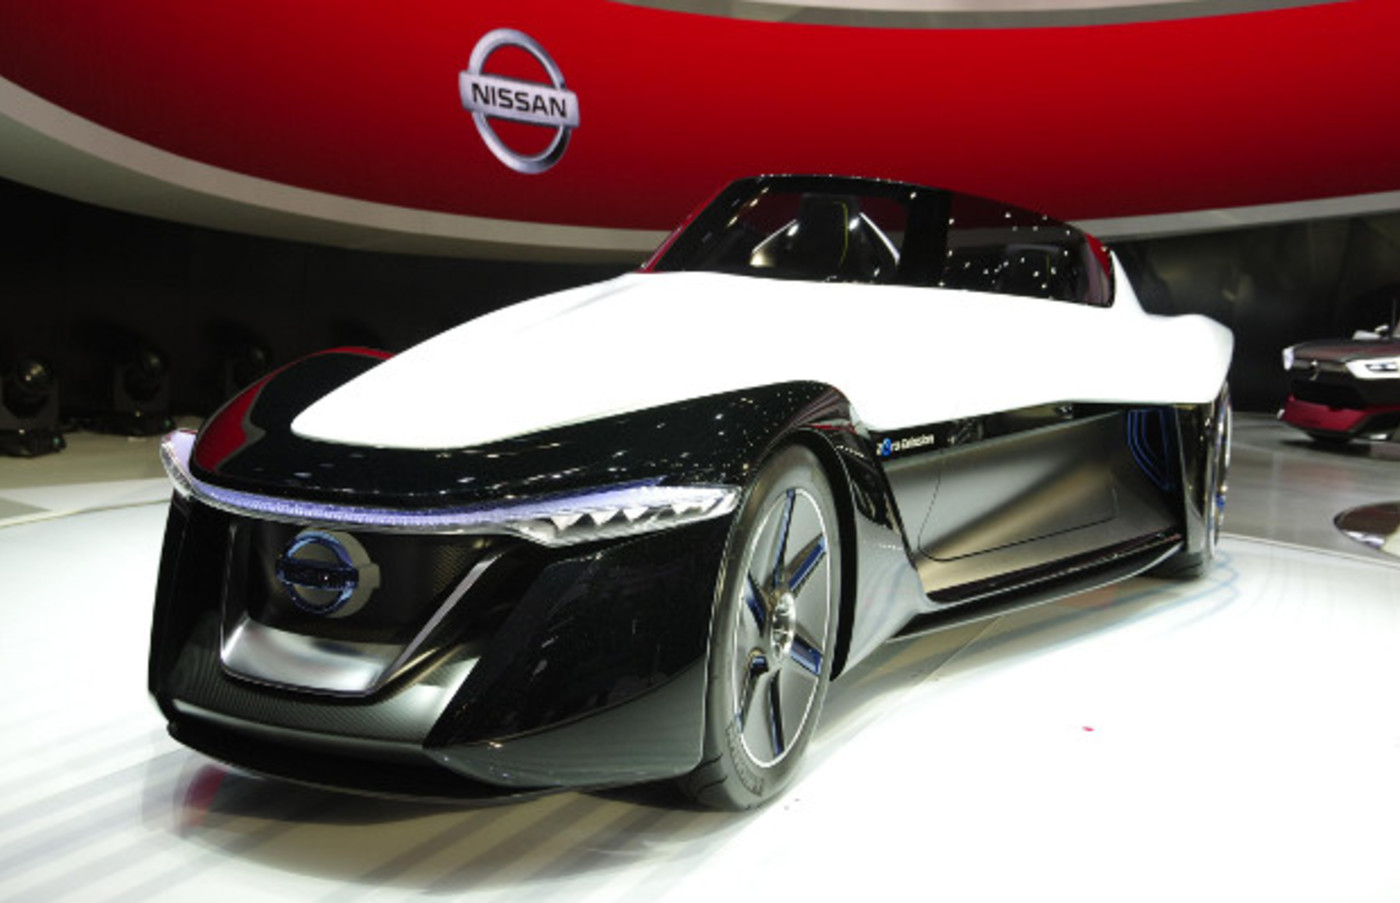 Nissan Claims The Bladeglider Will Be The Best Handling Car Ever Complex